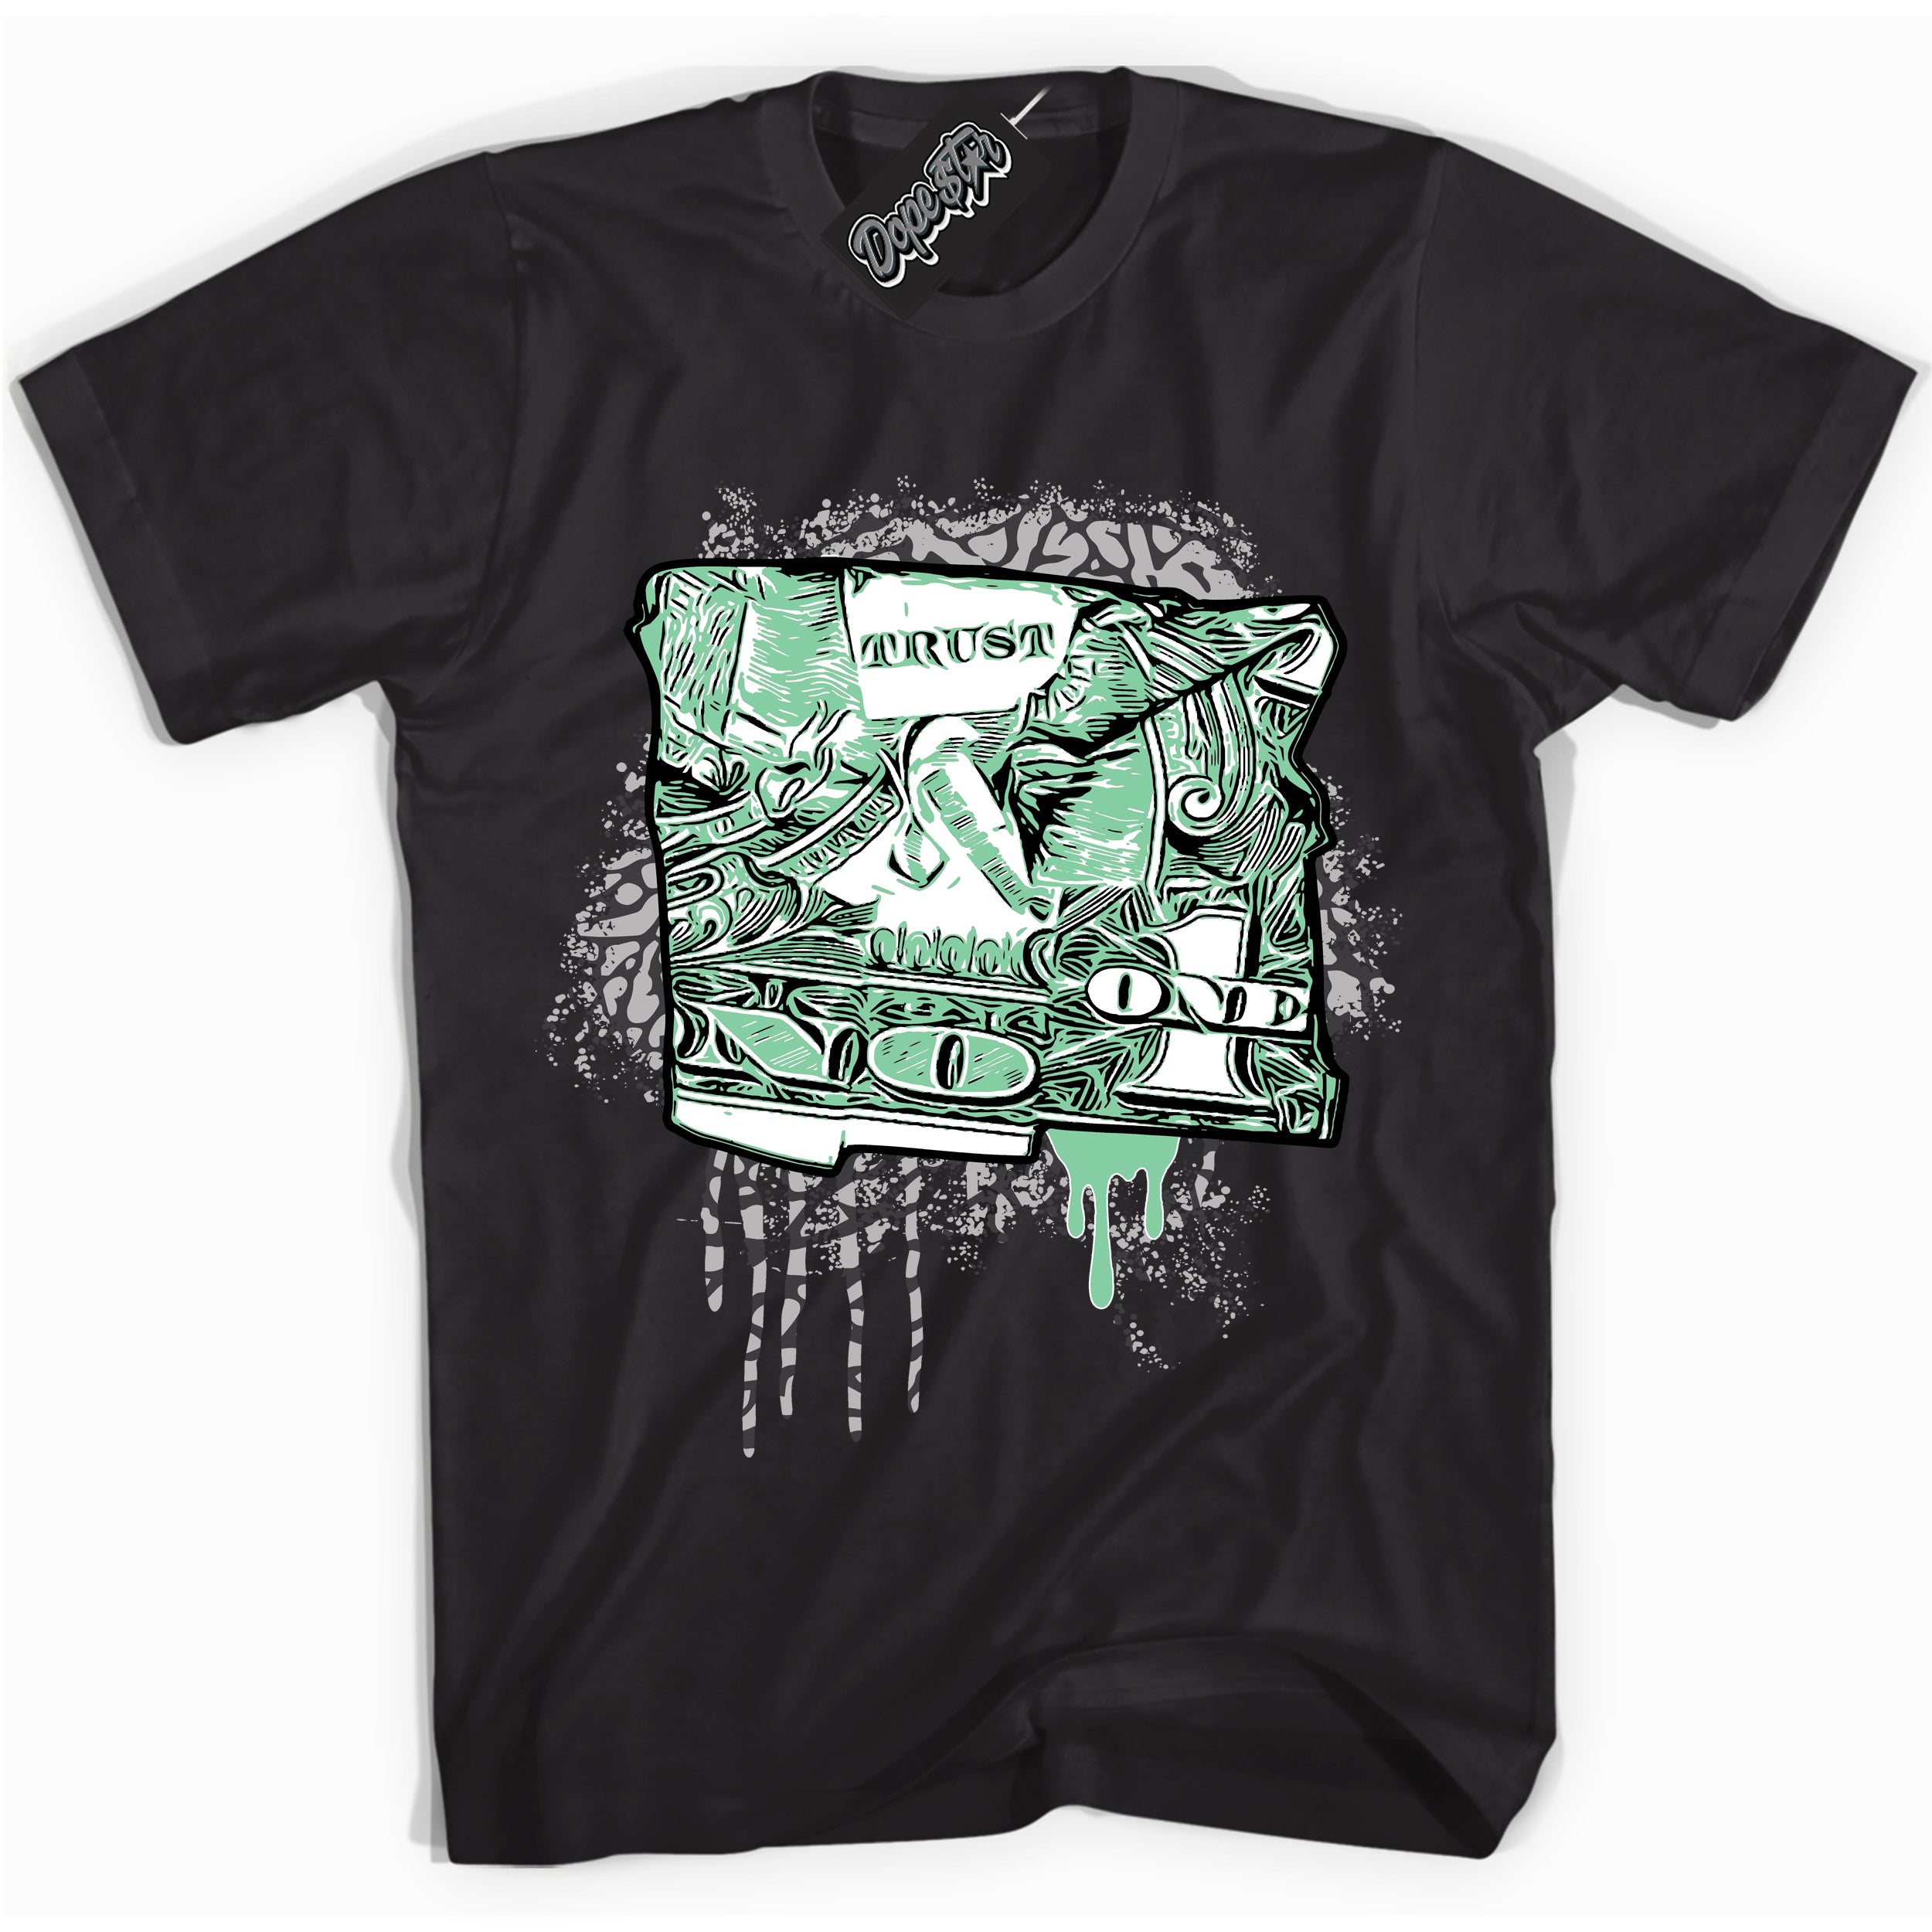 Cool Black graphic tee with “ Trust No One Dollar ” design, that perfectly matches Green Glow 3s sneakers 